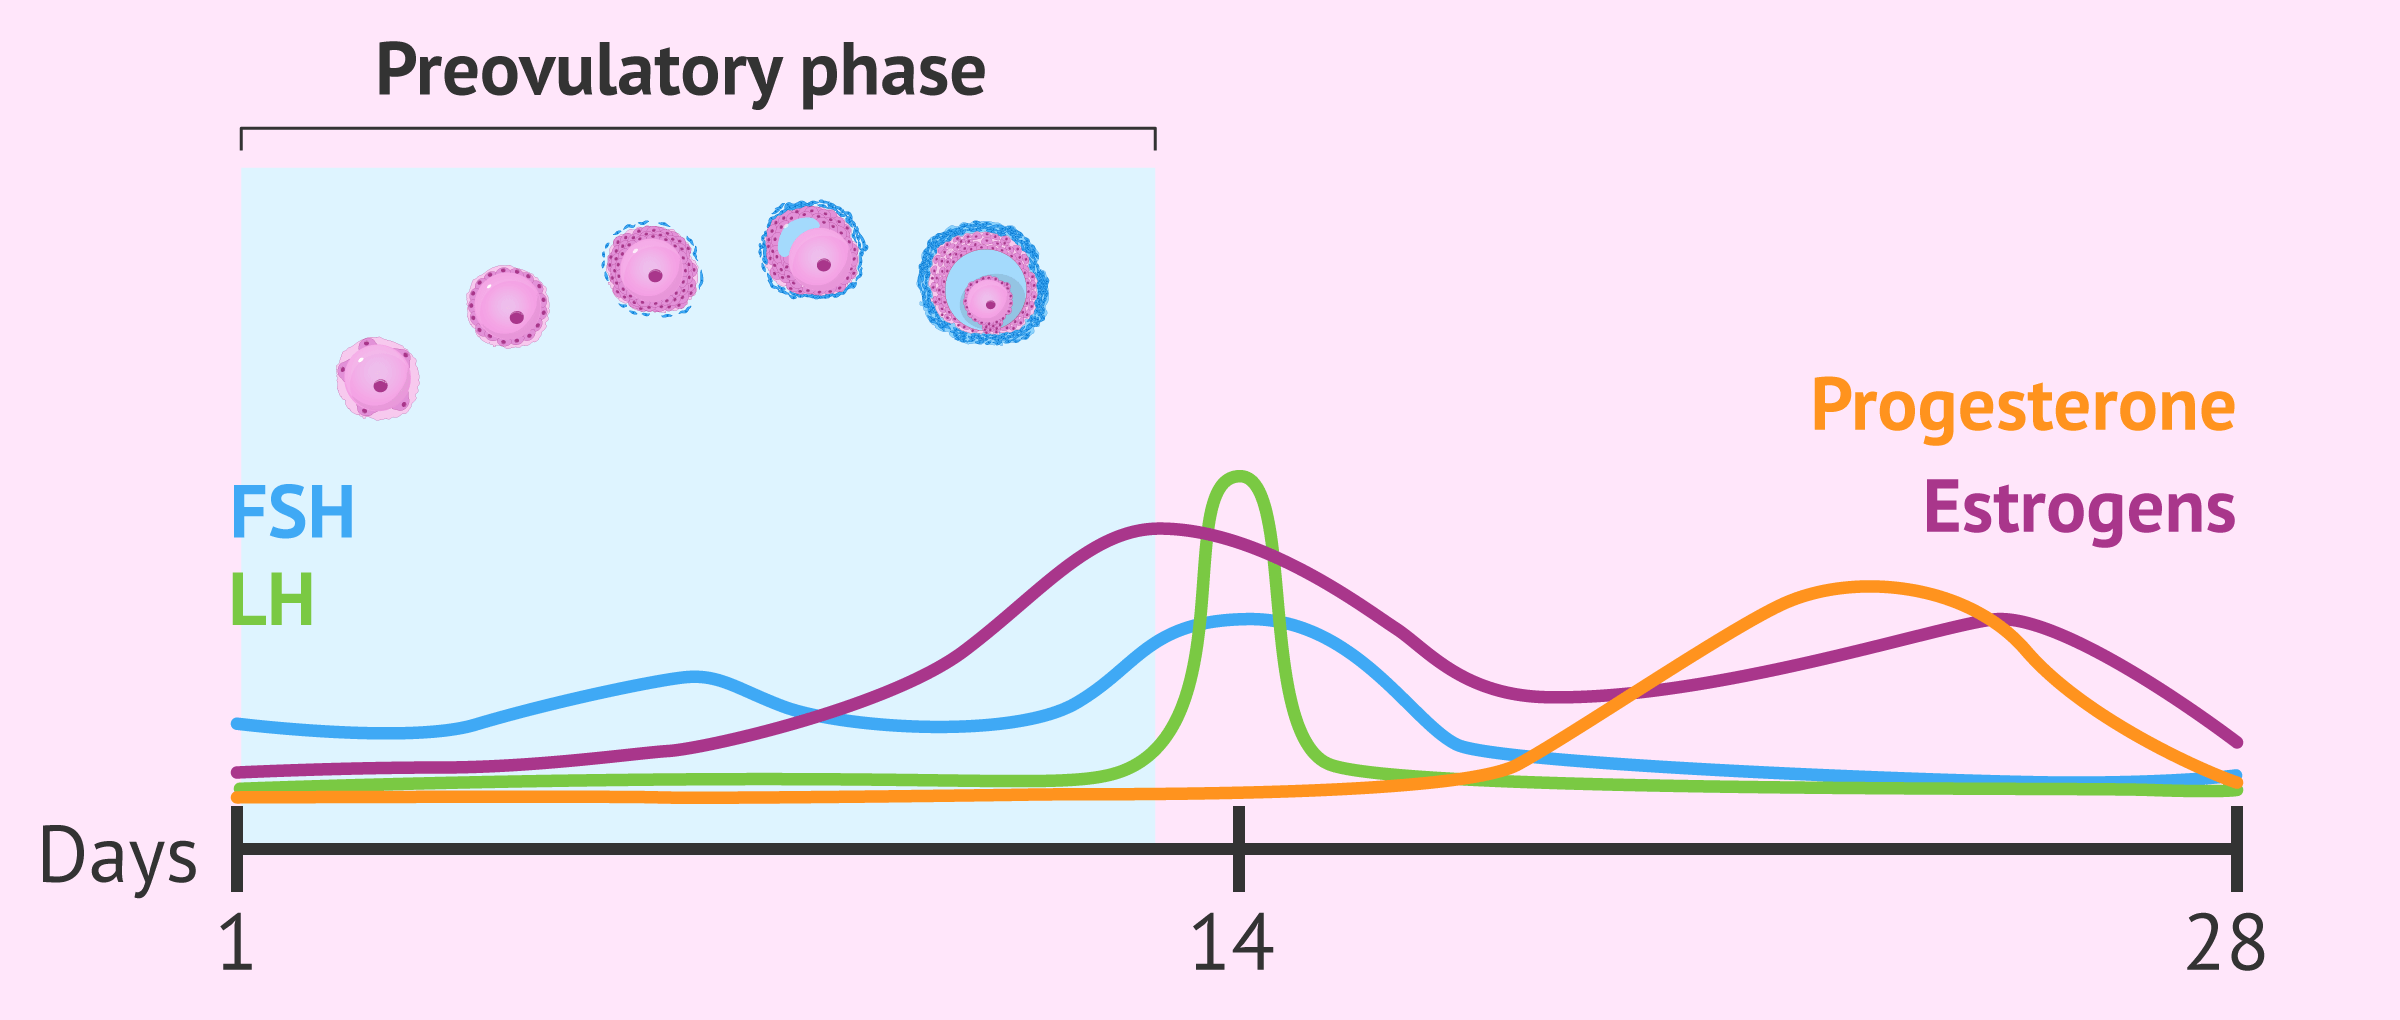 Hormonal and follicular changes in the preovulatory phase.